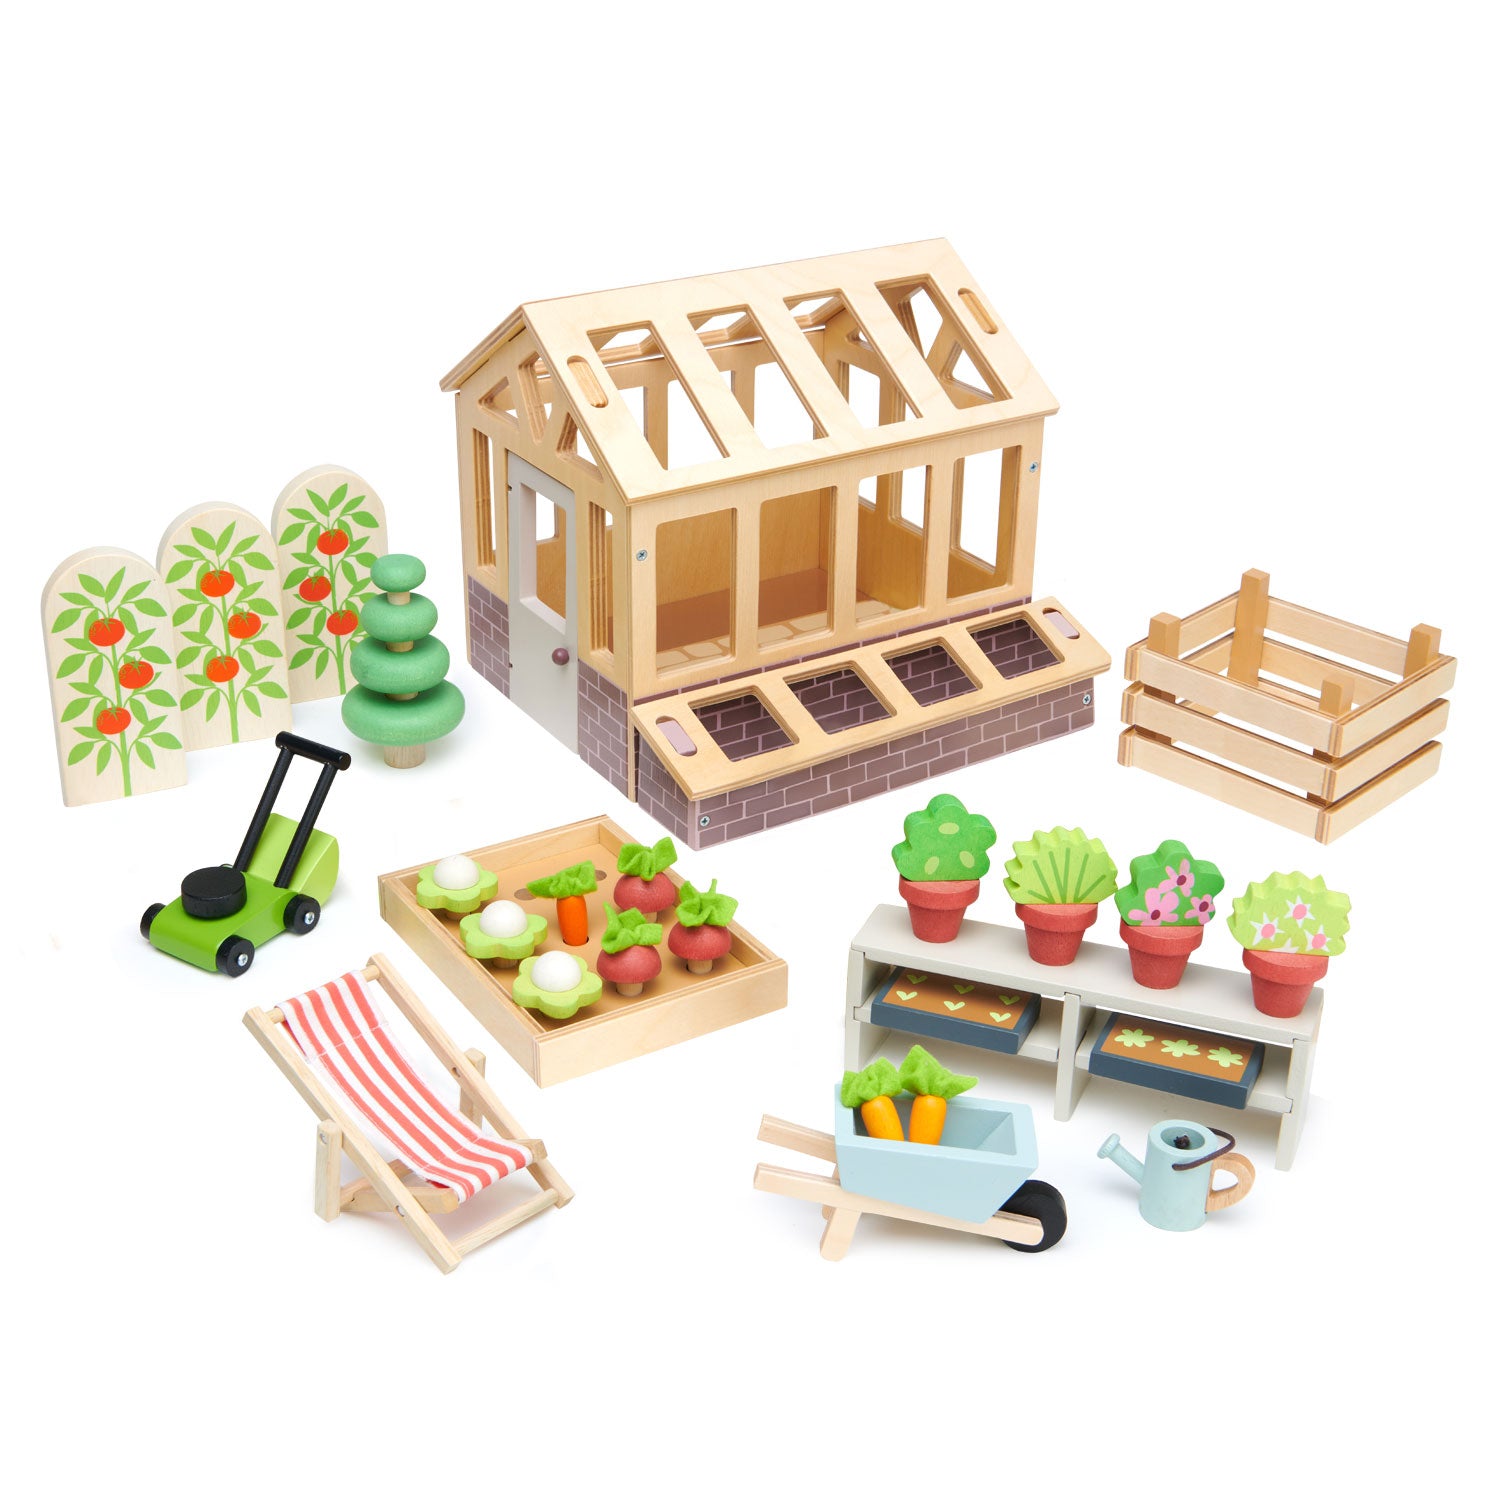 <p>Wanting an extension for your dolls house? For children who love nature and playing in the garden, this set is ideal for encouraging green fingers. A traditional plywood greenhouse with base has an opening door, and 2 removable roof panels. It can be filled with 2 seed trays, a planting bench, 4 pot plants, and 3 tomato shrubs. We have included a cold frame for nurturing seeds, a raised bed with 9 vegetables, a compost bin, a lawnmower, a watering can, a topiary tree, a wheelbarrow, and last but not least, a deck chair for your dolls to enjoy the fruits of their labor.</p>
<p>Age range: 3 Years And Older  </p>
<p>Product size: 18.9 x 11.81 x 8.27&quot;  </p>
<p> Weight: 3.67 lbs</p>
<p><strong>Dolls sold separately.</strong></p>
<p><a href="https://www.dropbox.com/s/k9kr0m79m8c0sm1/TL8371%20Greenhouse%20Printable.pdf?dl=0"><strong>Download Miniature Garden Printable</strong></a></p>
<p><a href="https://www.dropbox.com/s/k9kr0m79m8c0sm1/TL8371%20Greenhouse%20Printable.pdf?dl=0"><strong>Download free printable</strong></a></p>
